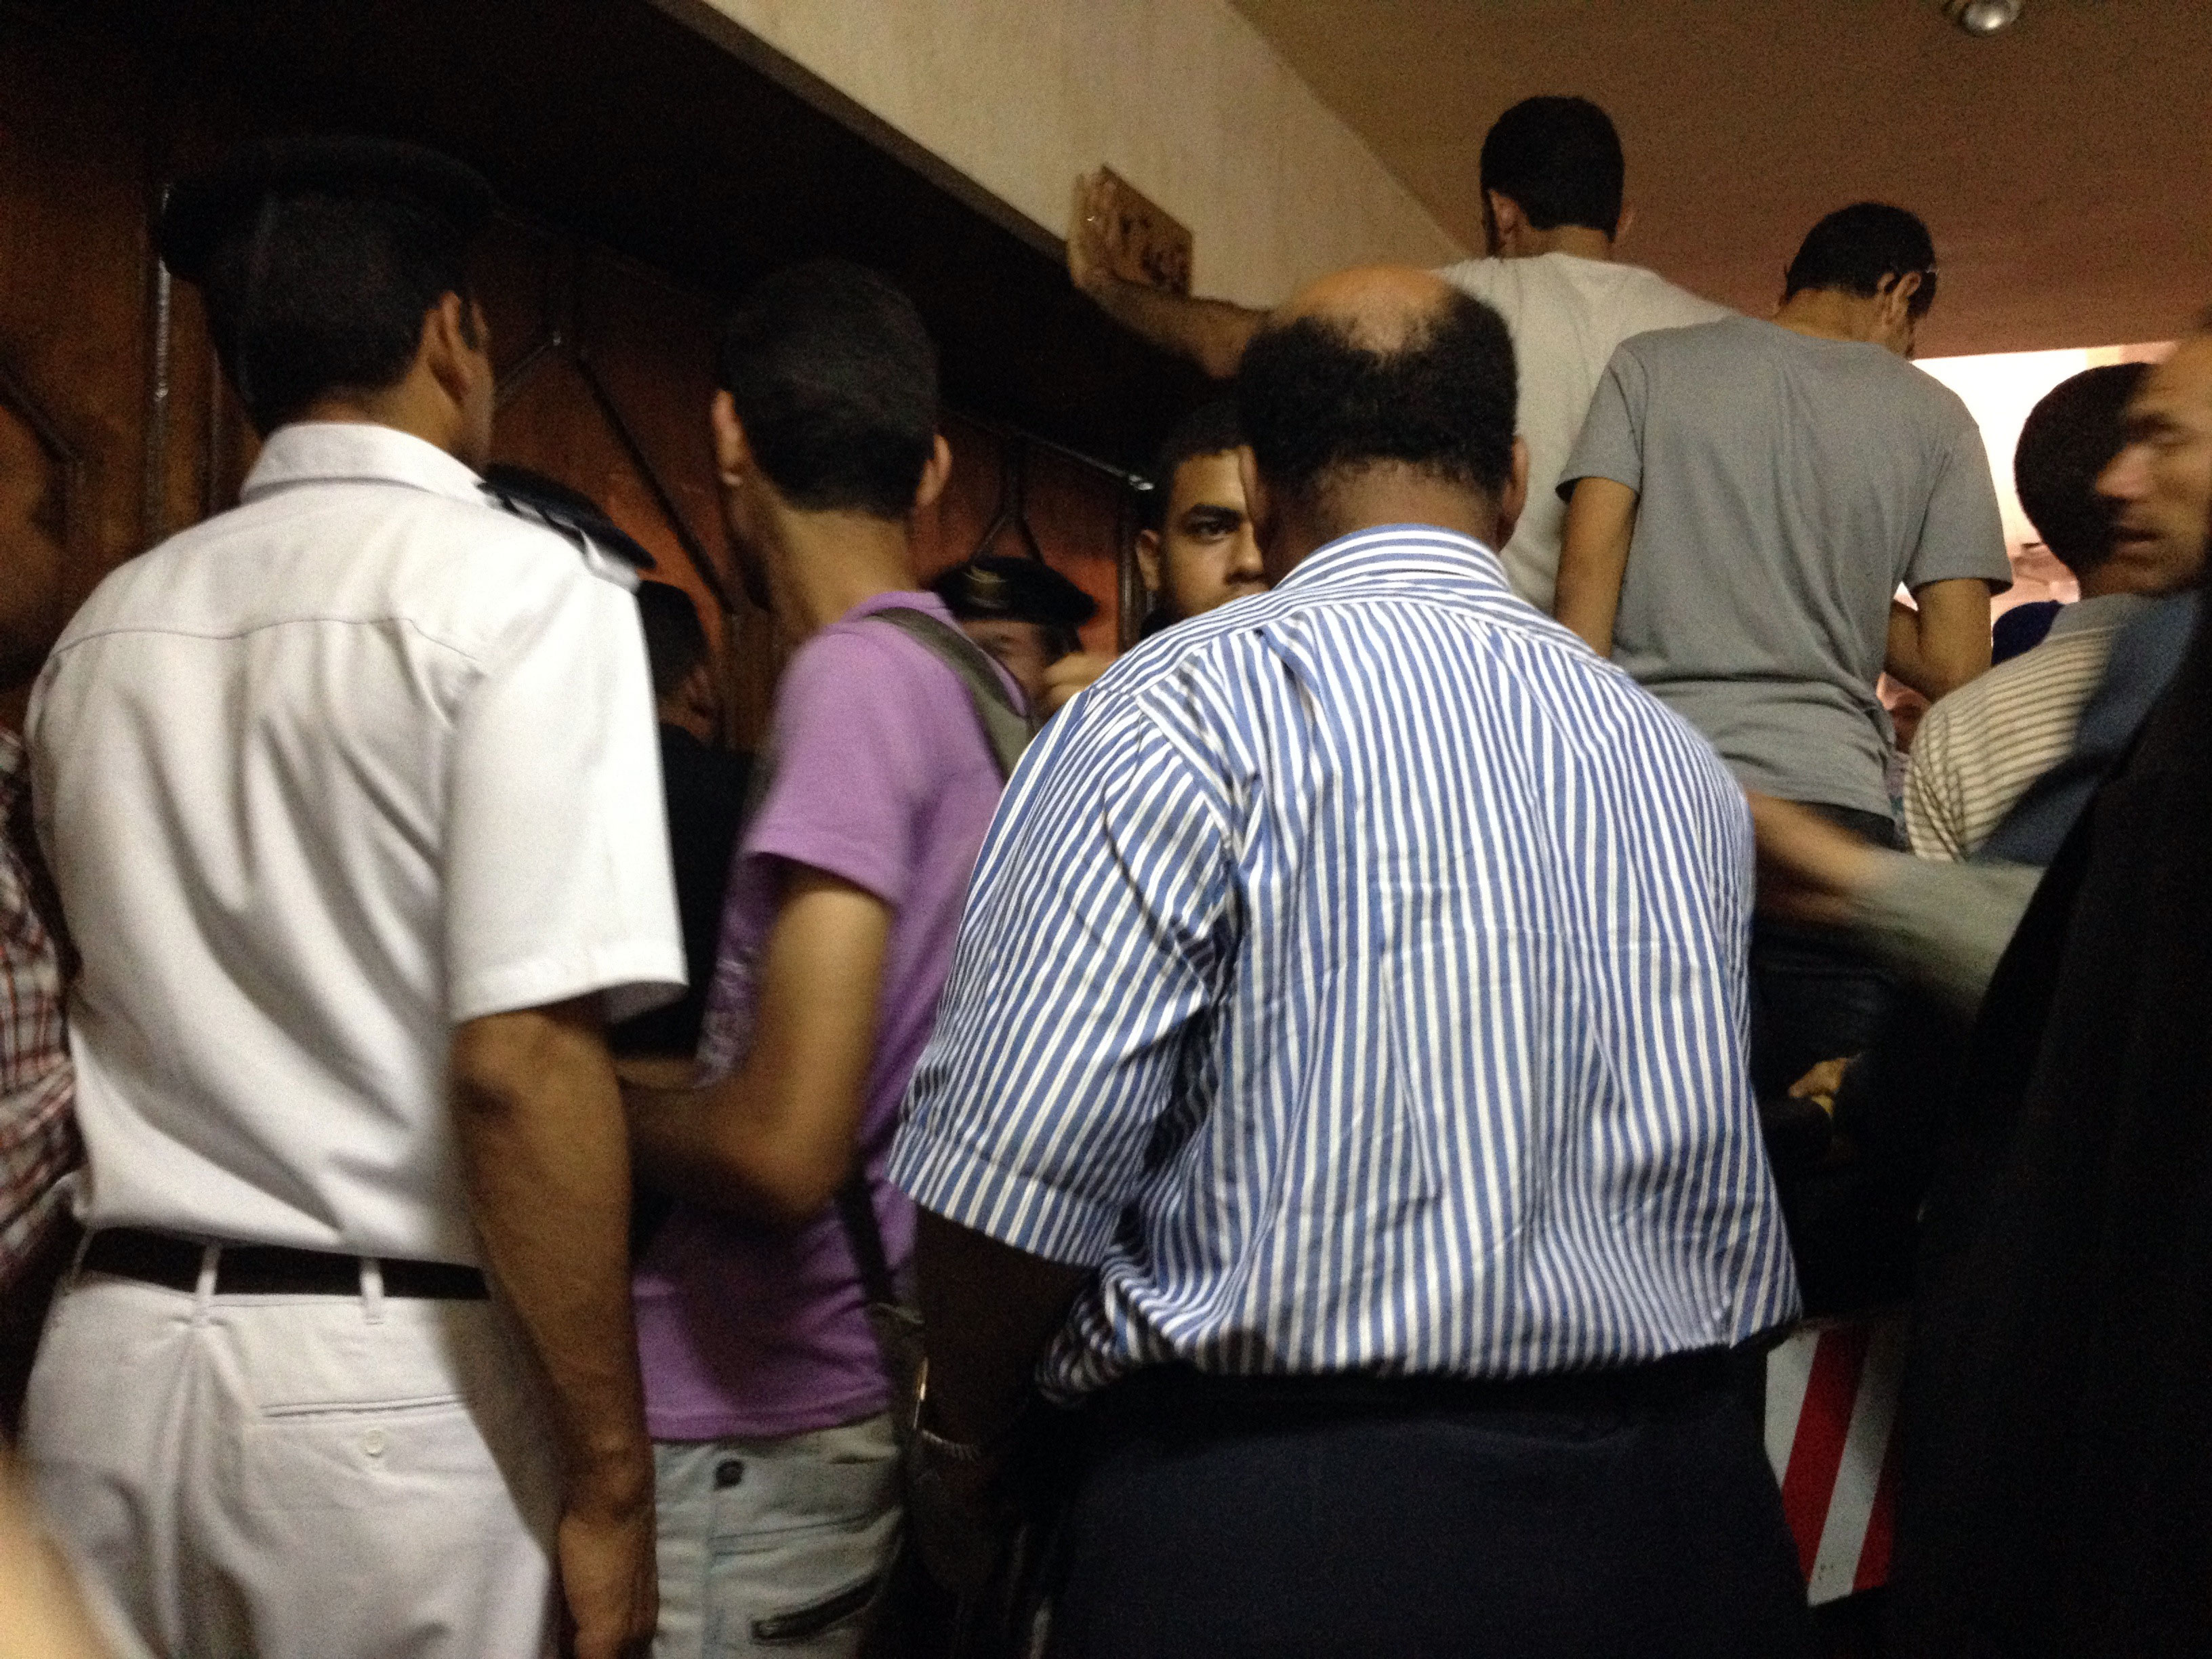 Lawyers, reporters and Muslim Brotherhood supporters banged the door of courtroom 12 - Ahmed Aboul Enein